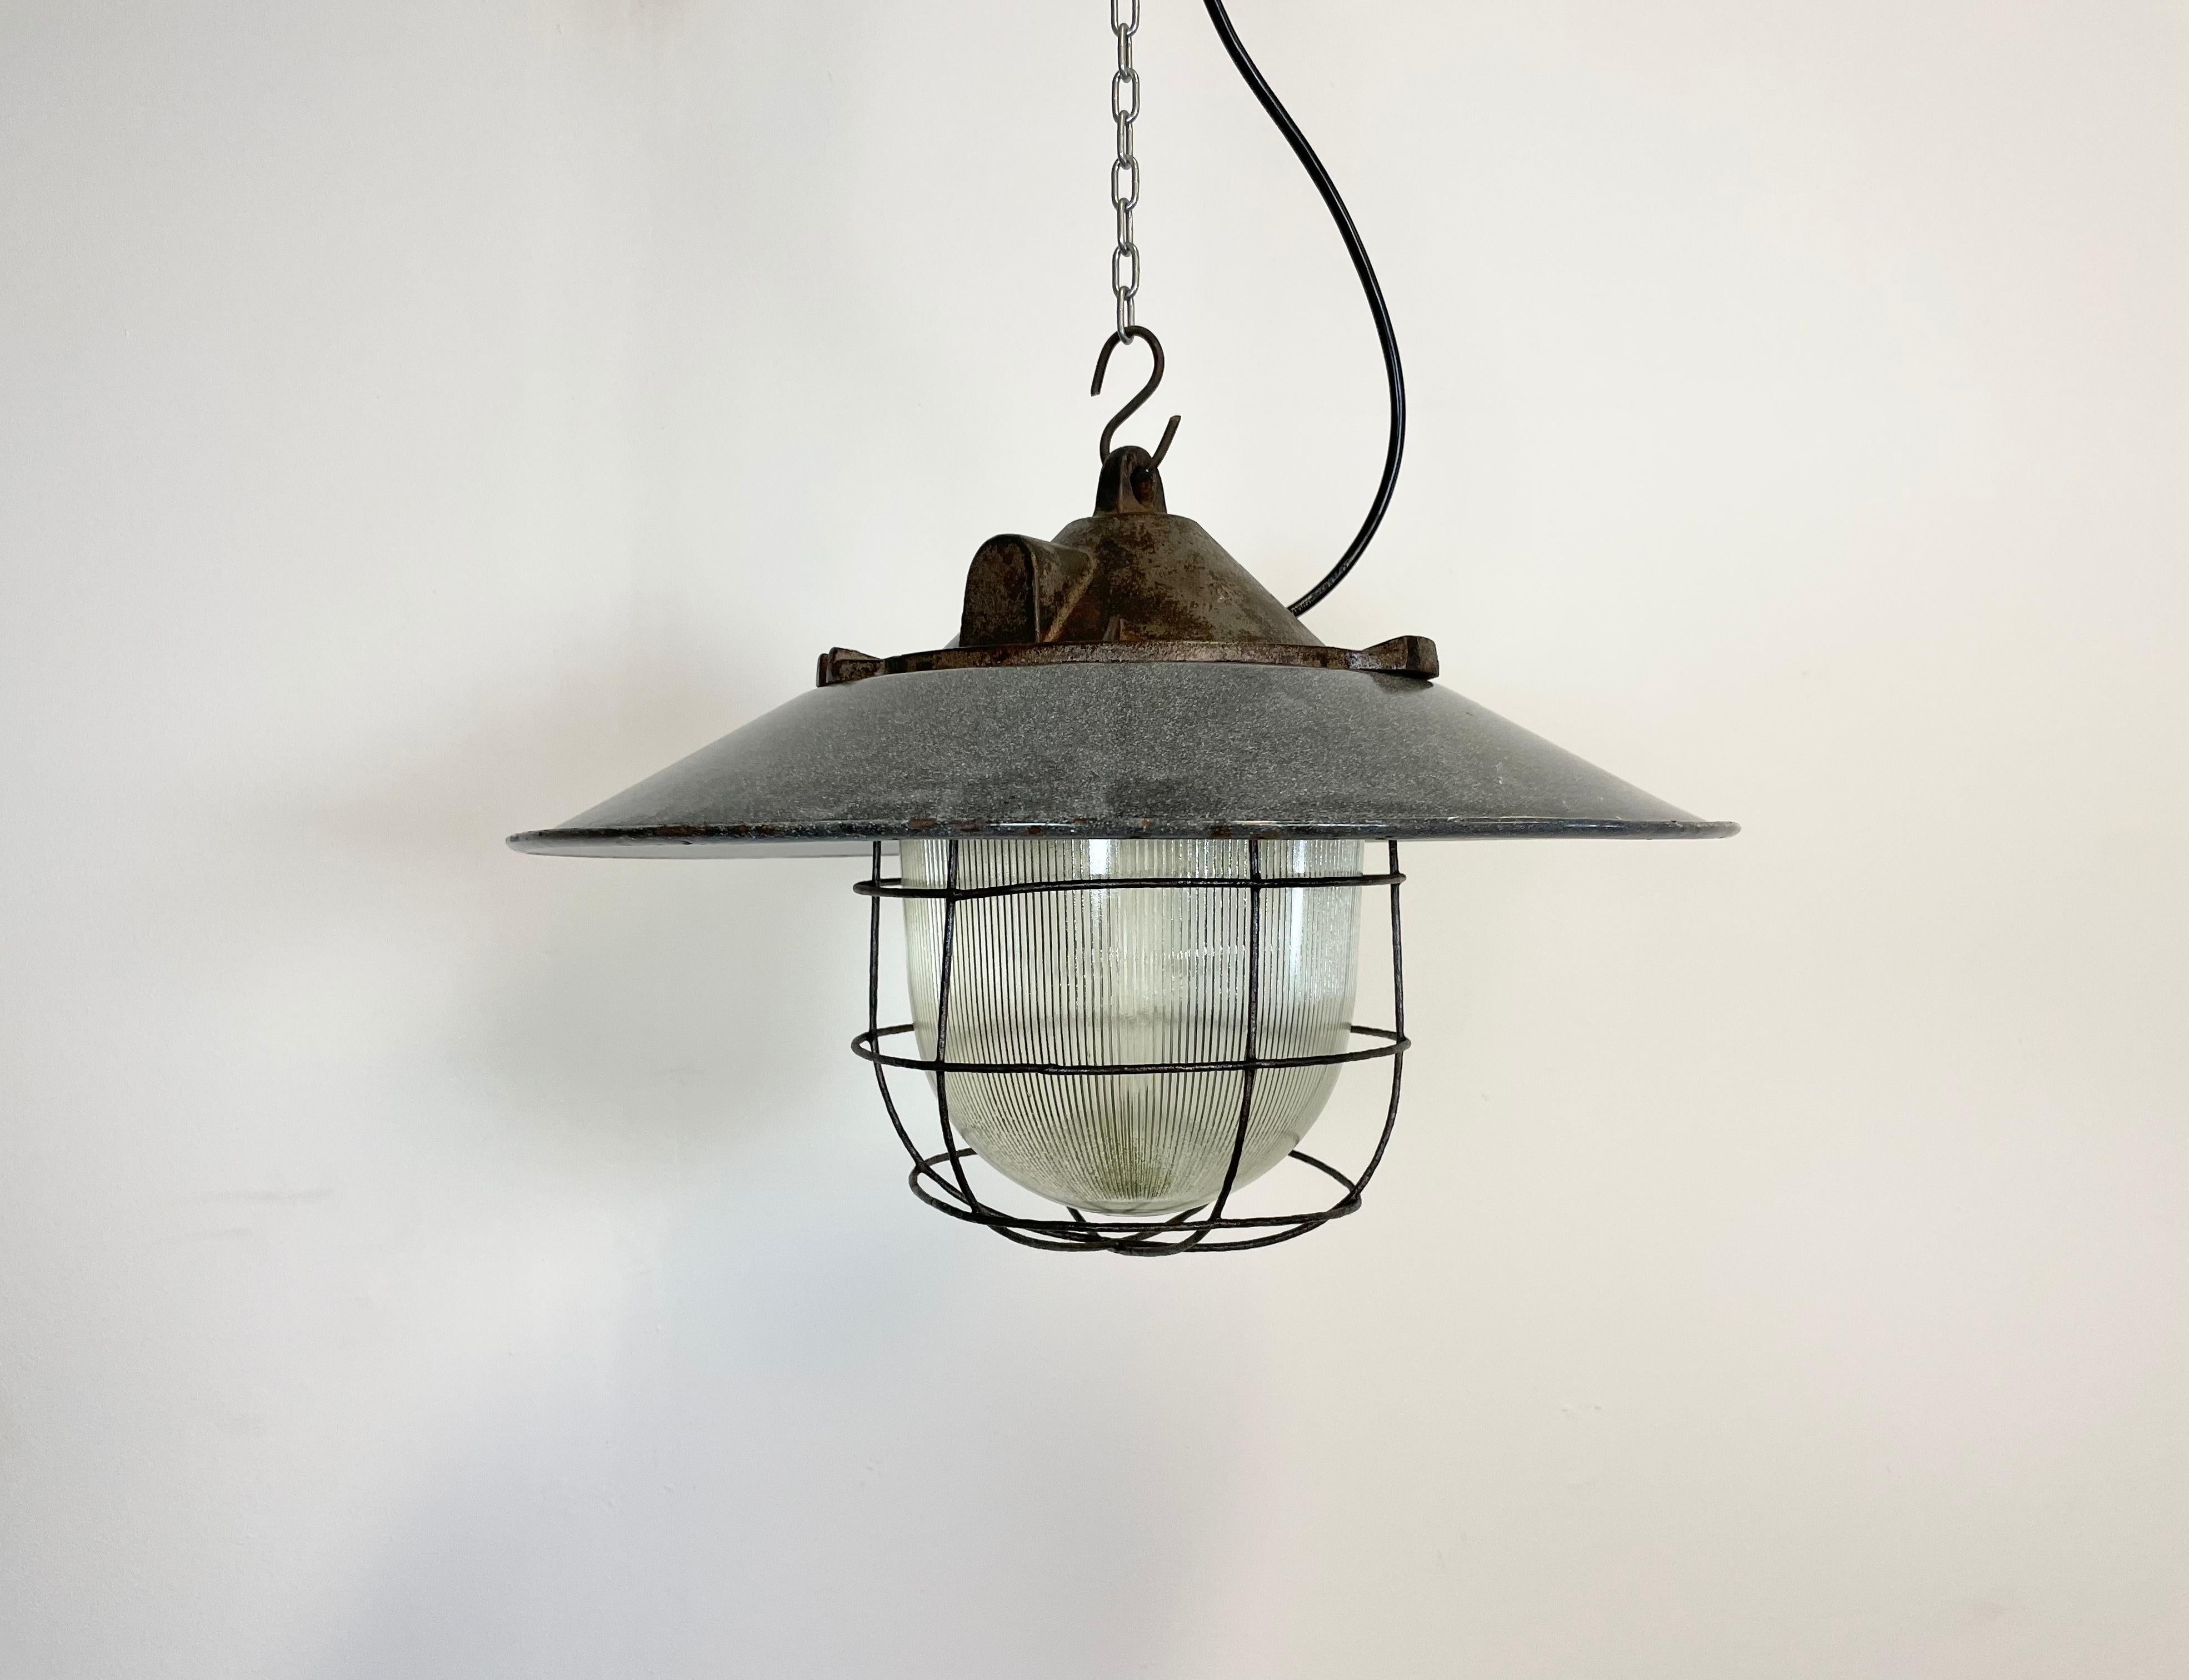 Industrial factory pendant lamp in cast iron made in former Czechoslovakia during the 1950s. It features a grey metal enamel shade with white enamel interior,a striped glass and an iron cage. The porcelain socket requires E 27 light bulbs. New wire.